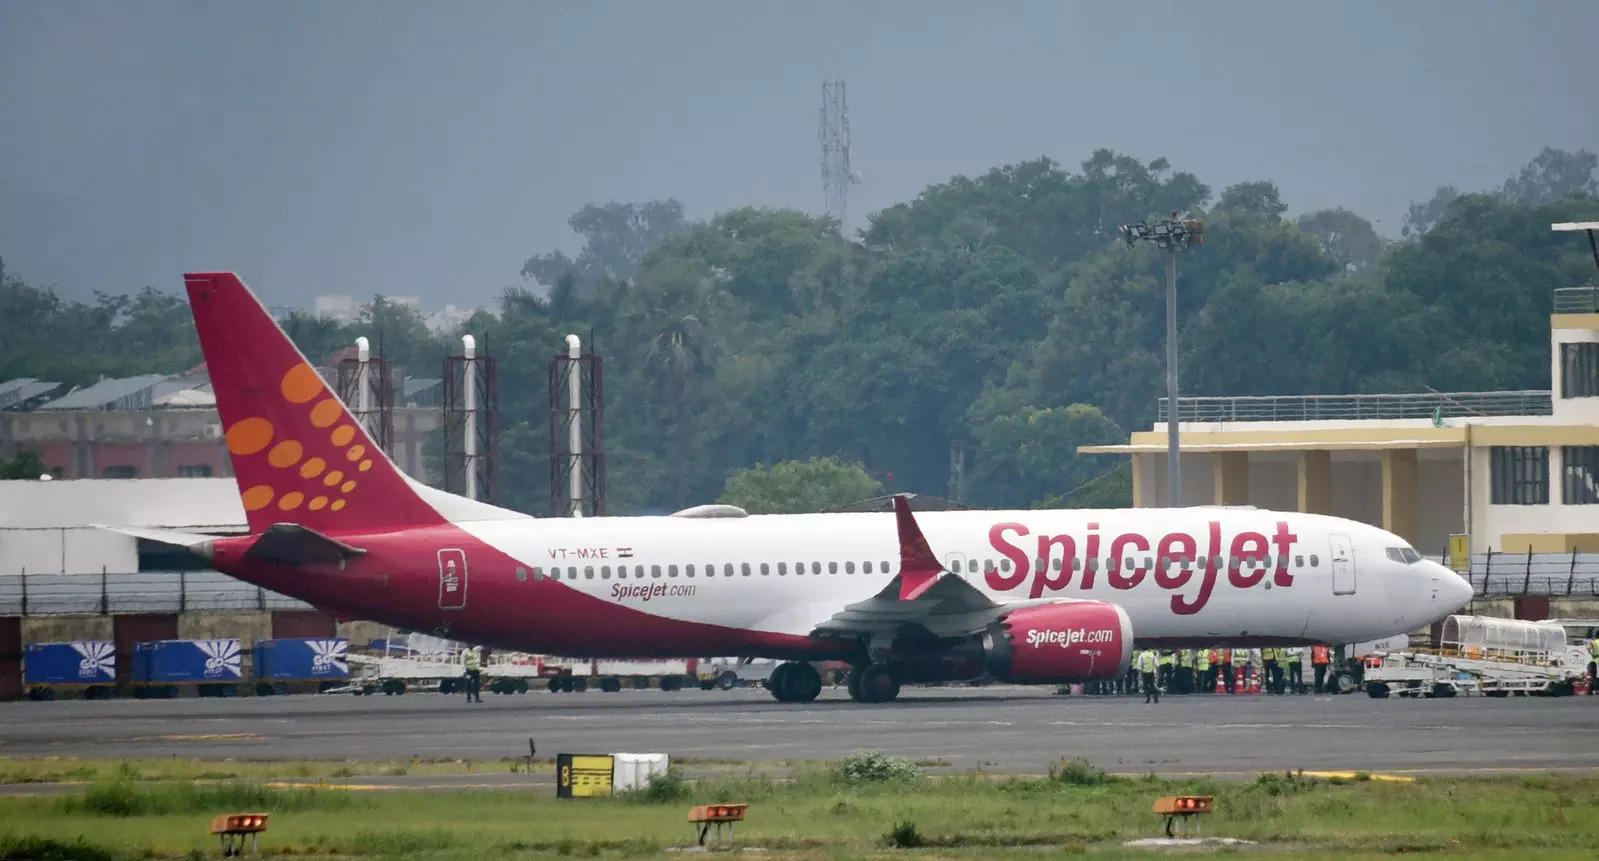 SpiceJet plane makes priority landing in Mumbai after windshield cracks mid-air